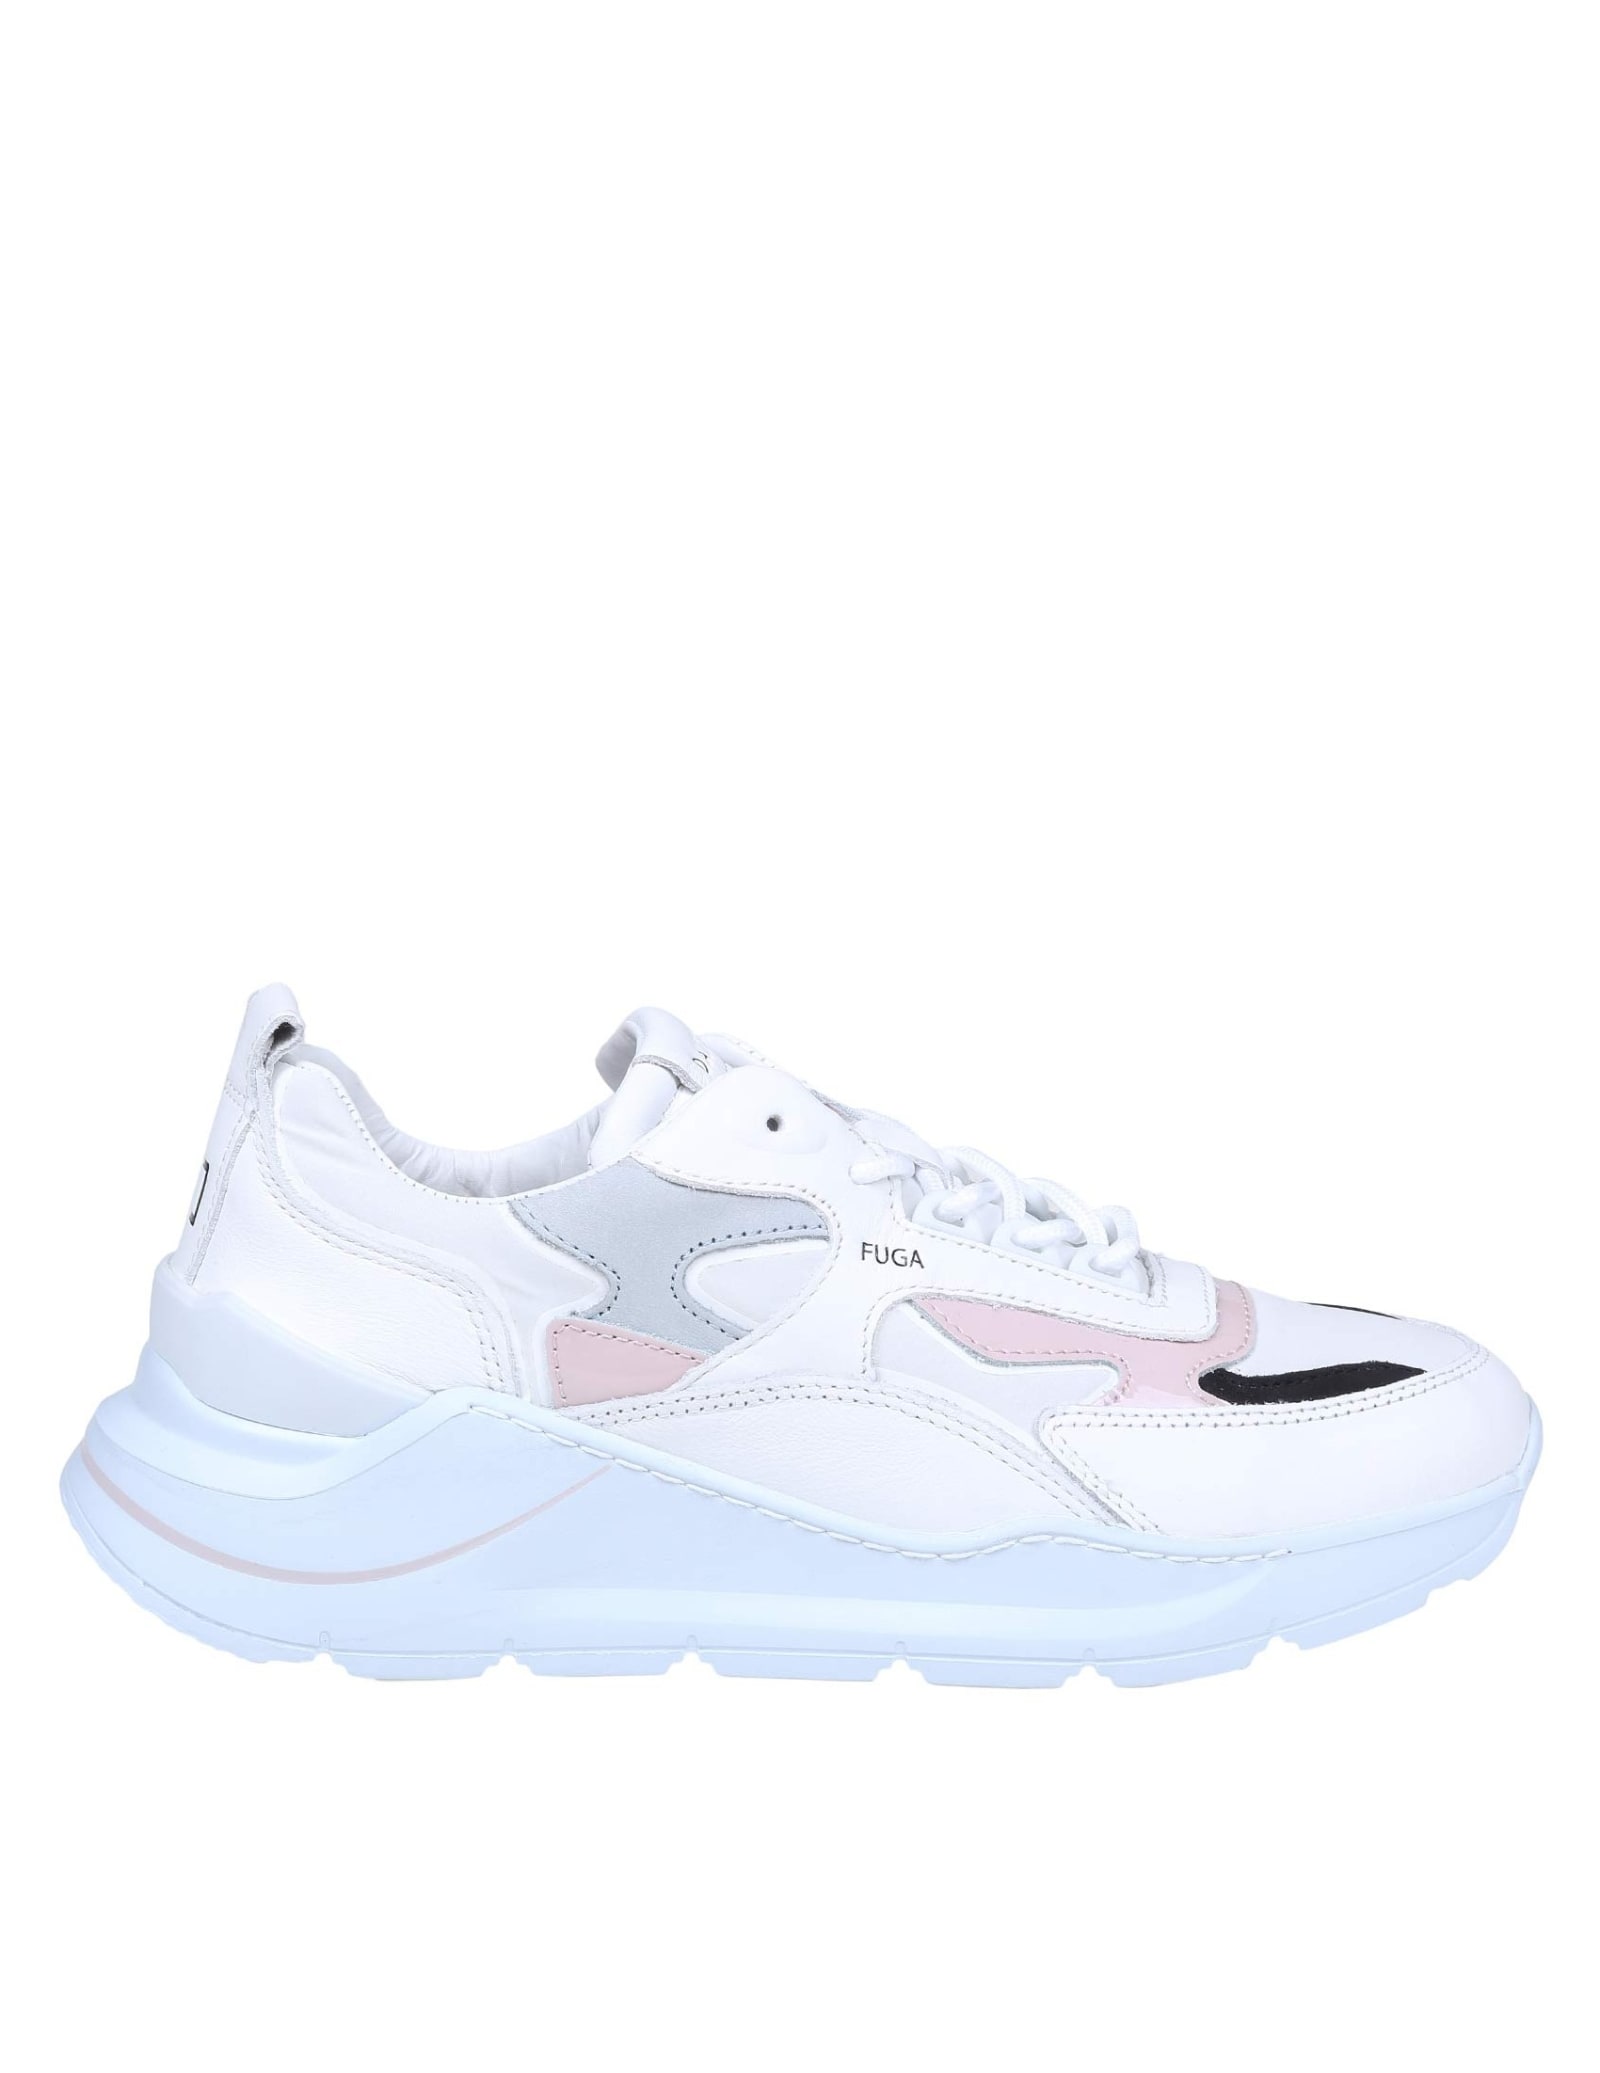 D.A.T.E. White Leather And Nylon Sneakers